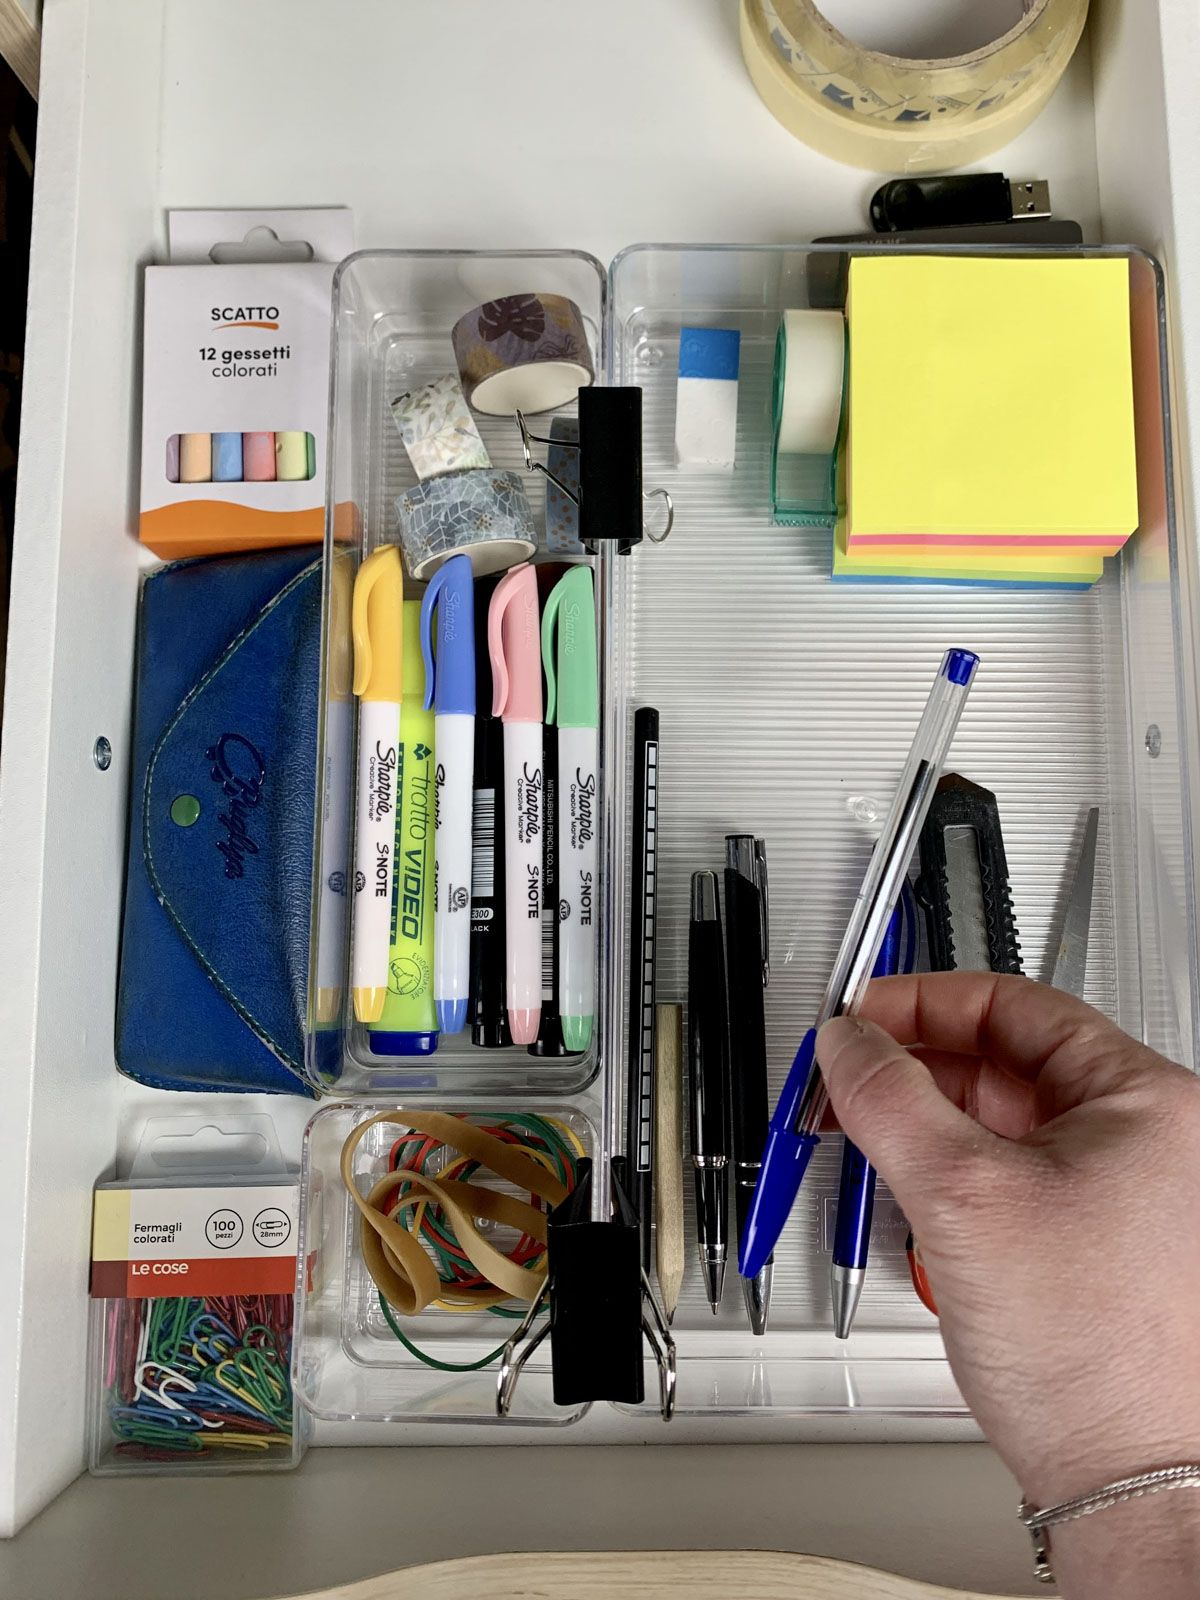 Keep the Drawer Tidy with Organizer Trays